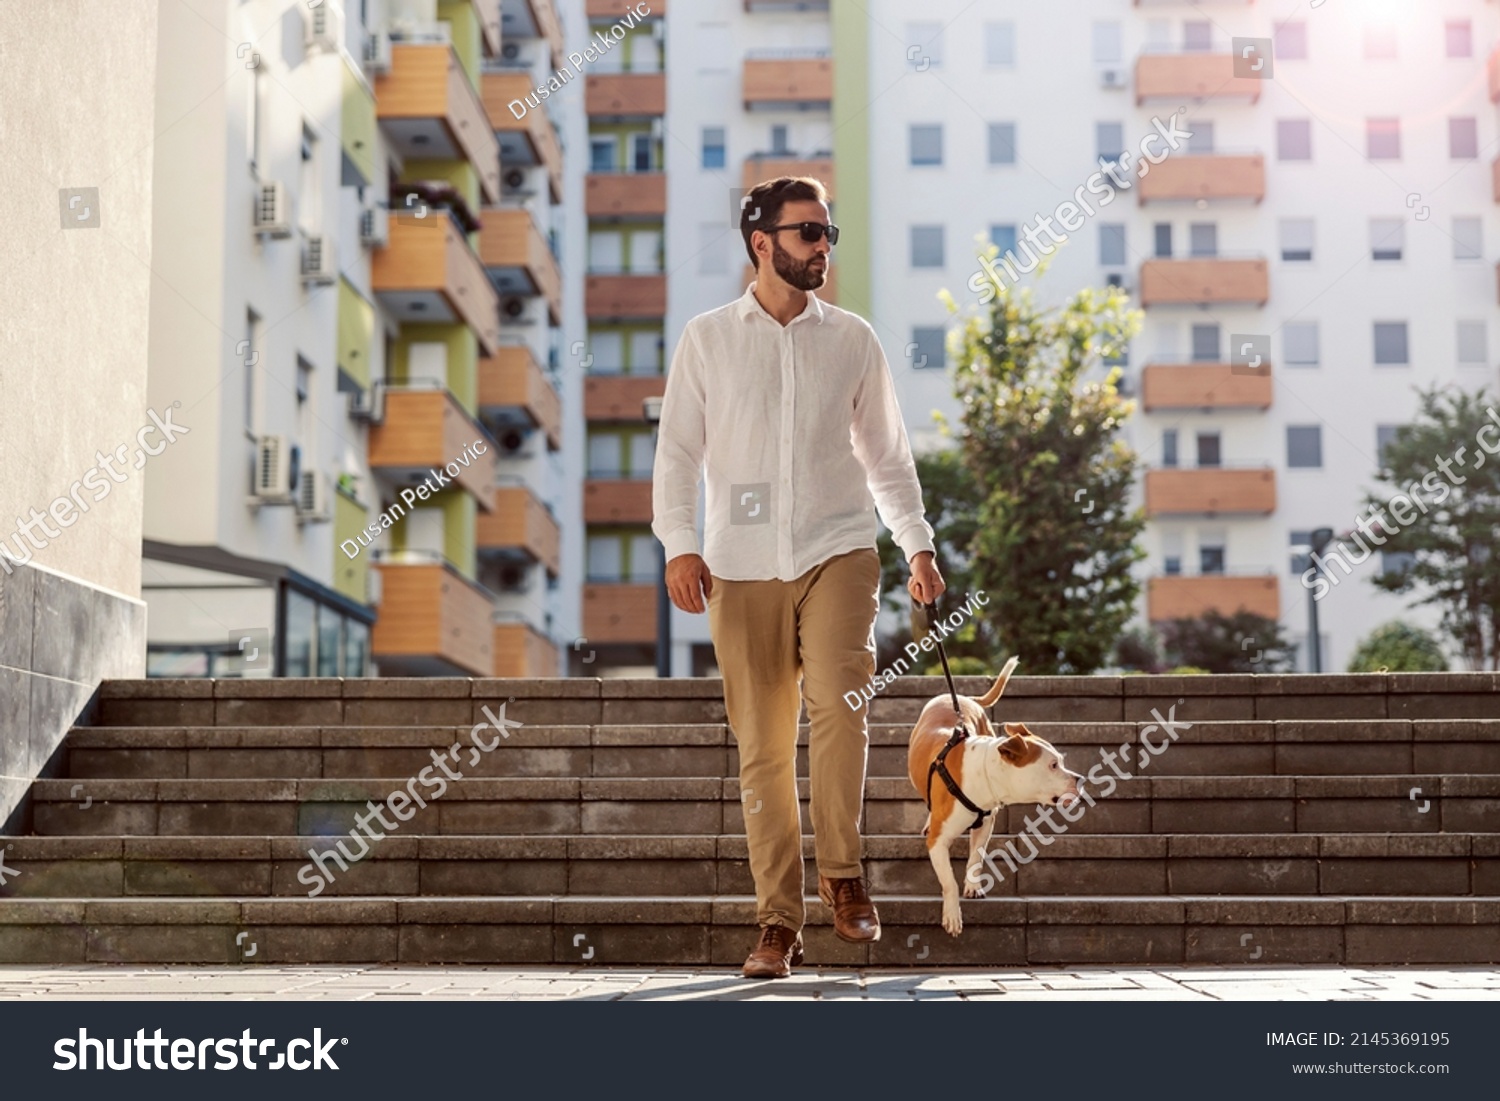 A busy man dressed smart casual, with sunglasses is walking his dog in the urban exterior. The dog descending stairs. A man with a dog in a walk in the urban exterior. #2145369195